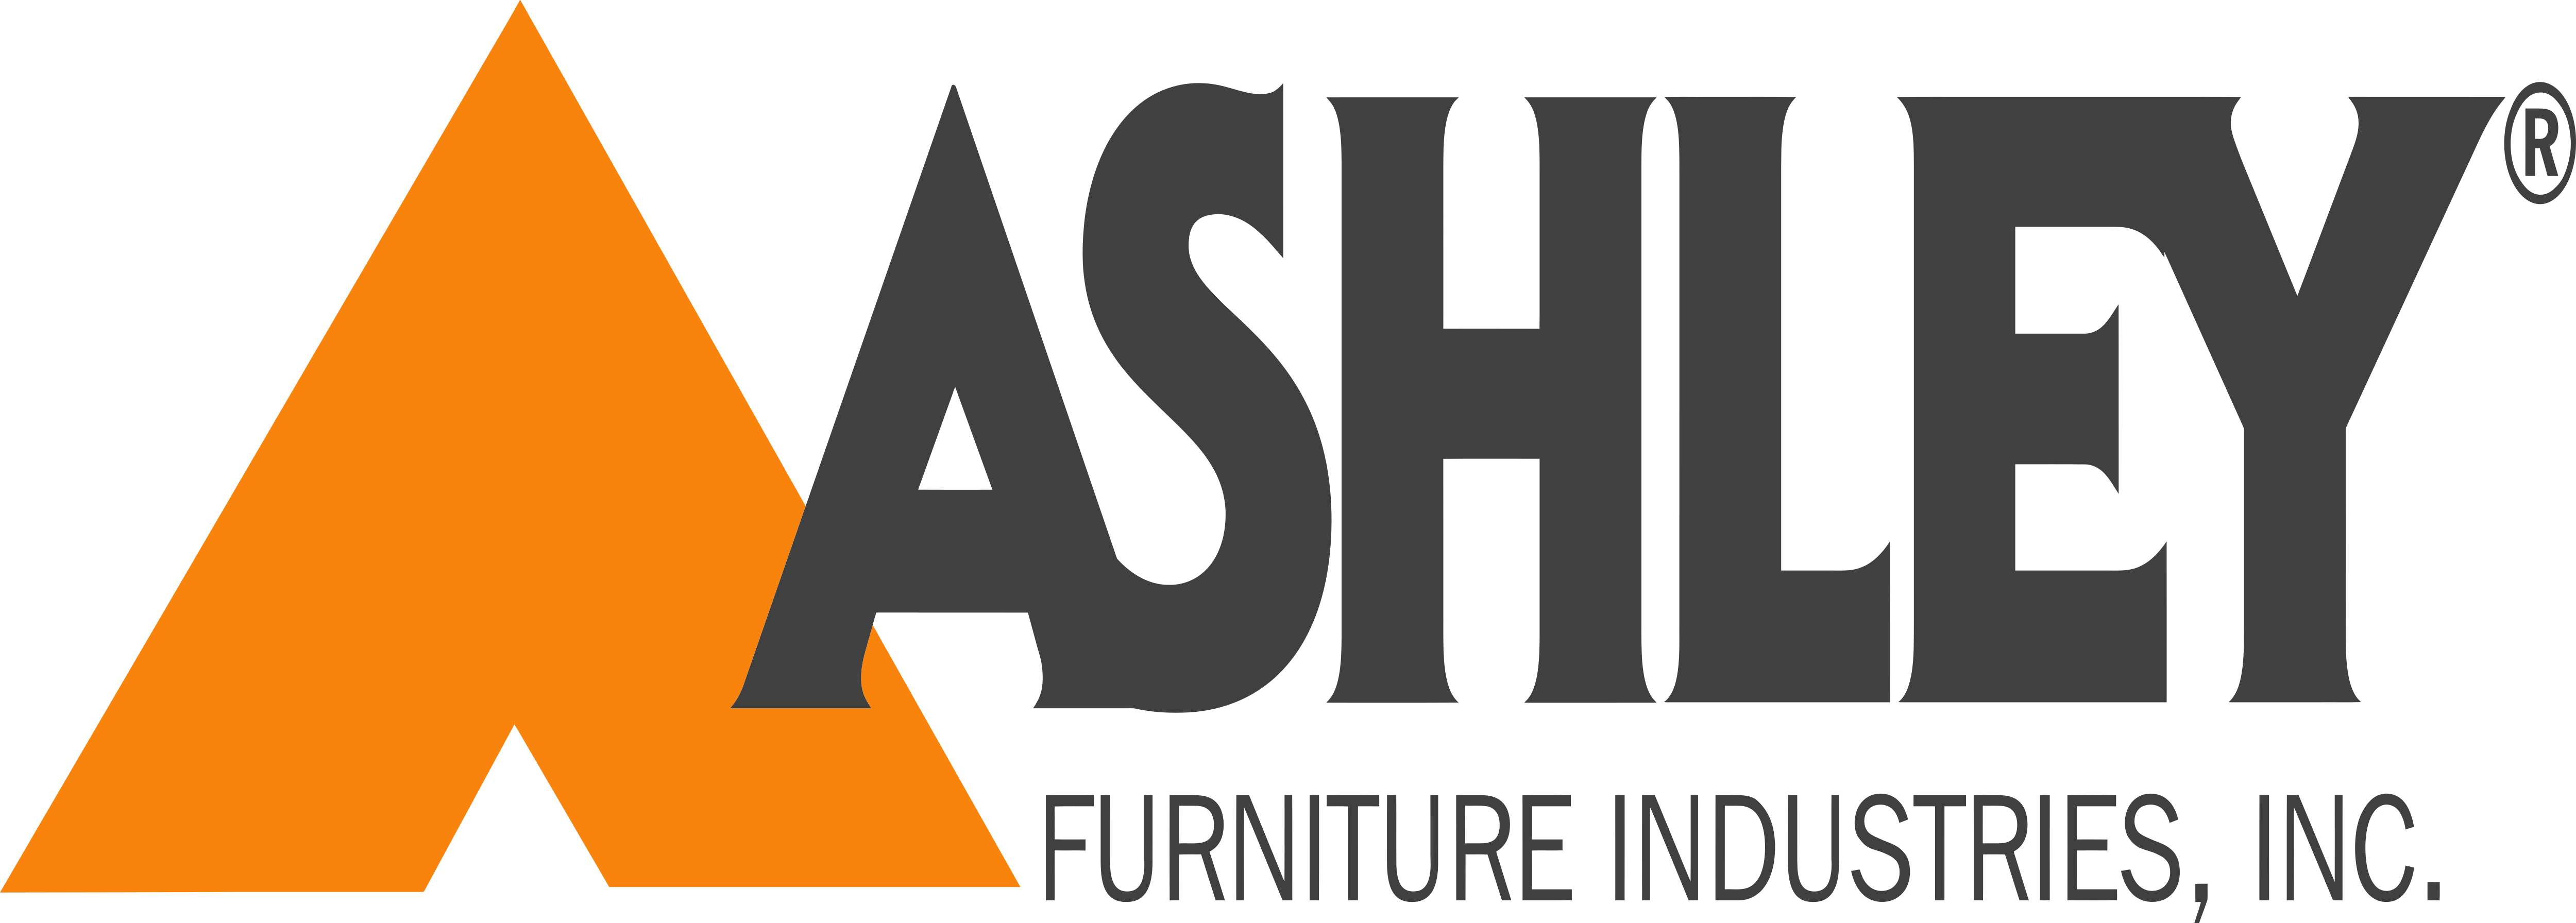 ASHLEY HOMESTORE - 5% Cash Back for Purchases Sitewide